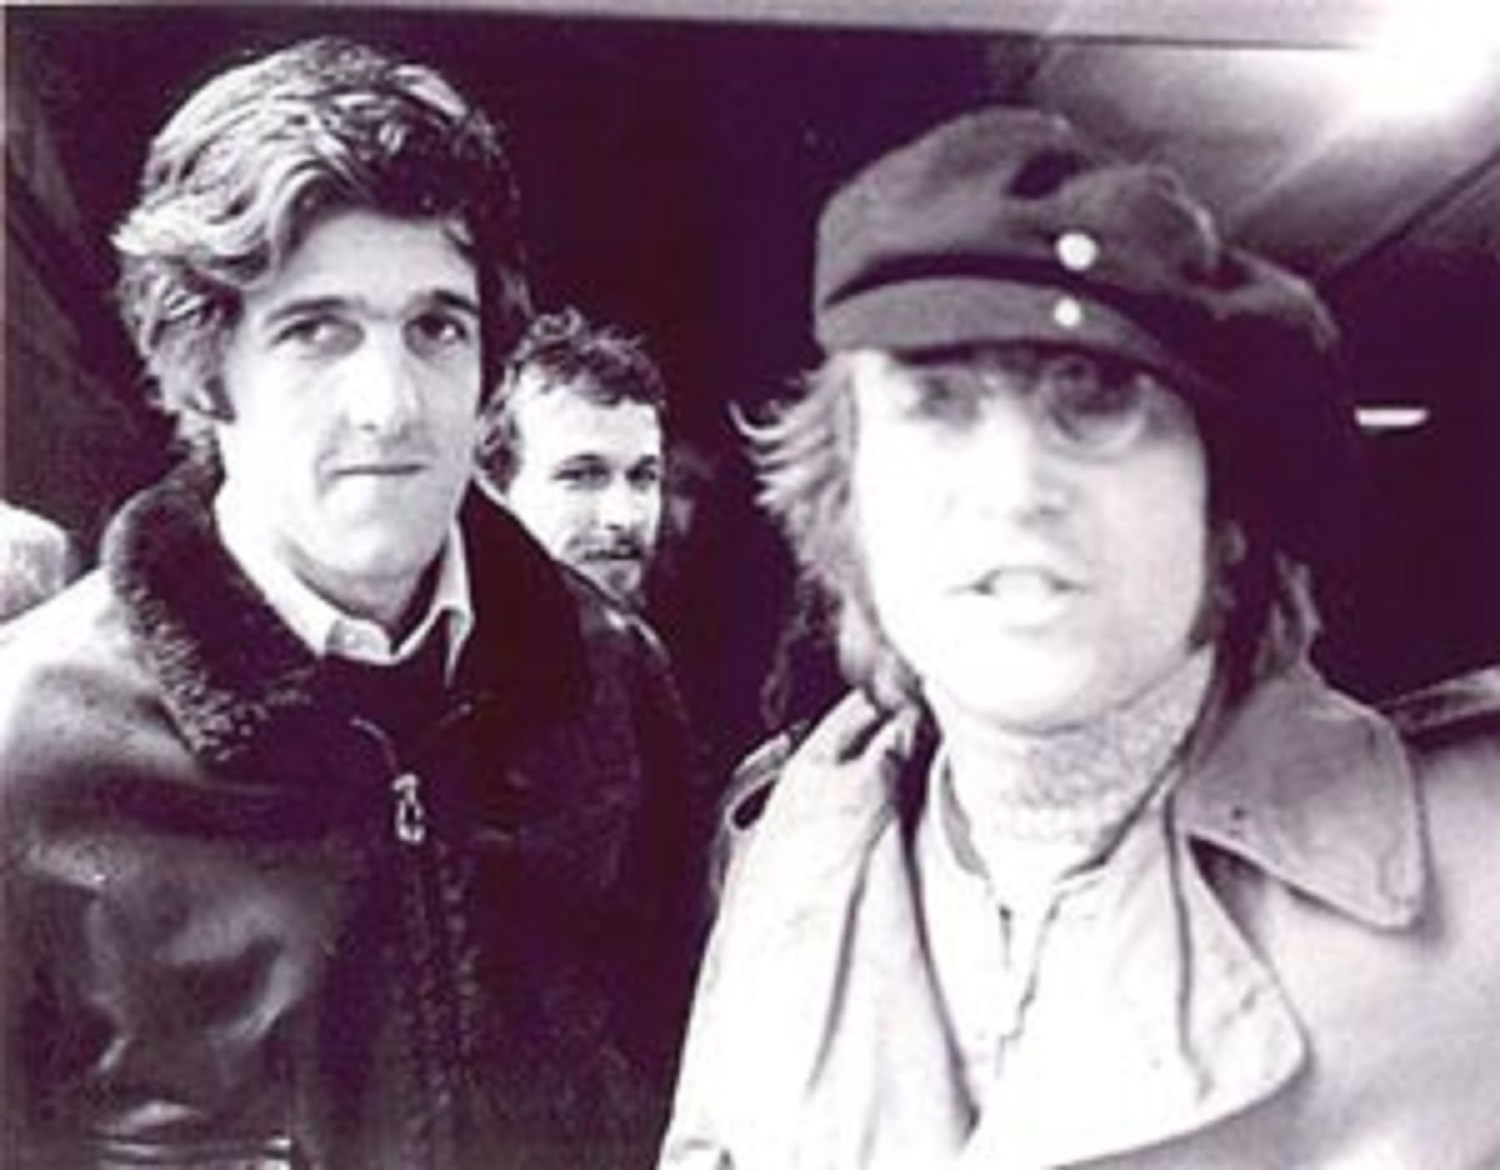 JOHN KERRY AND BEATLE JOHN LENNON COMING OUT OF THE NEW YORK CI